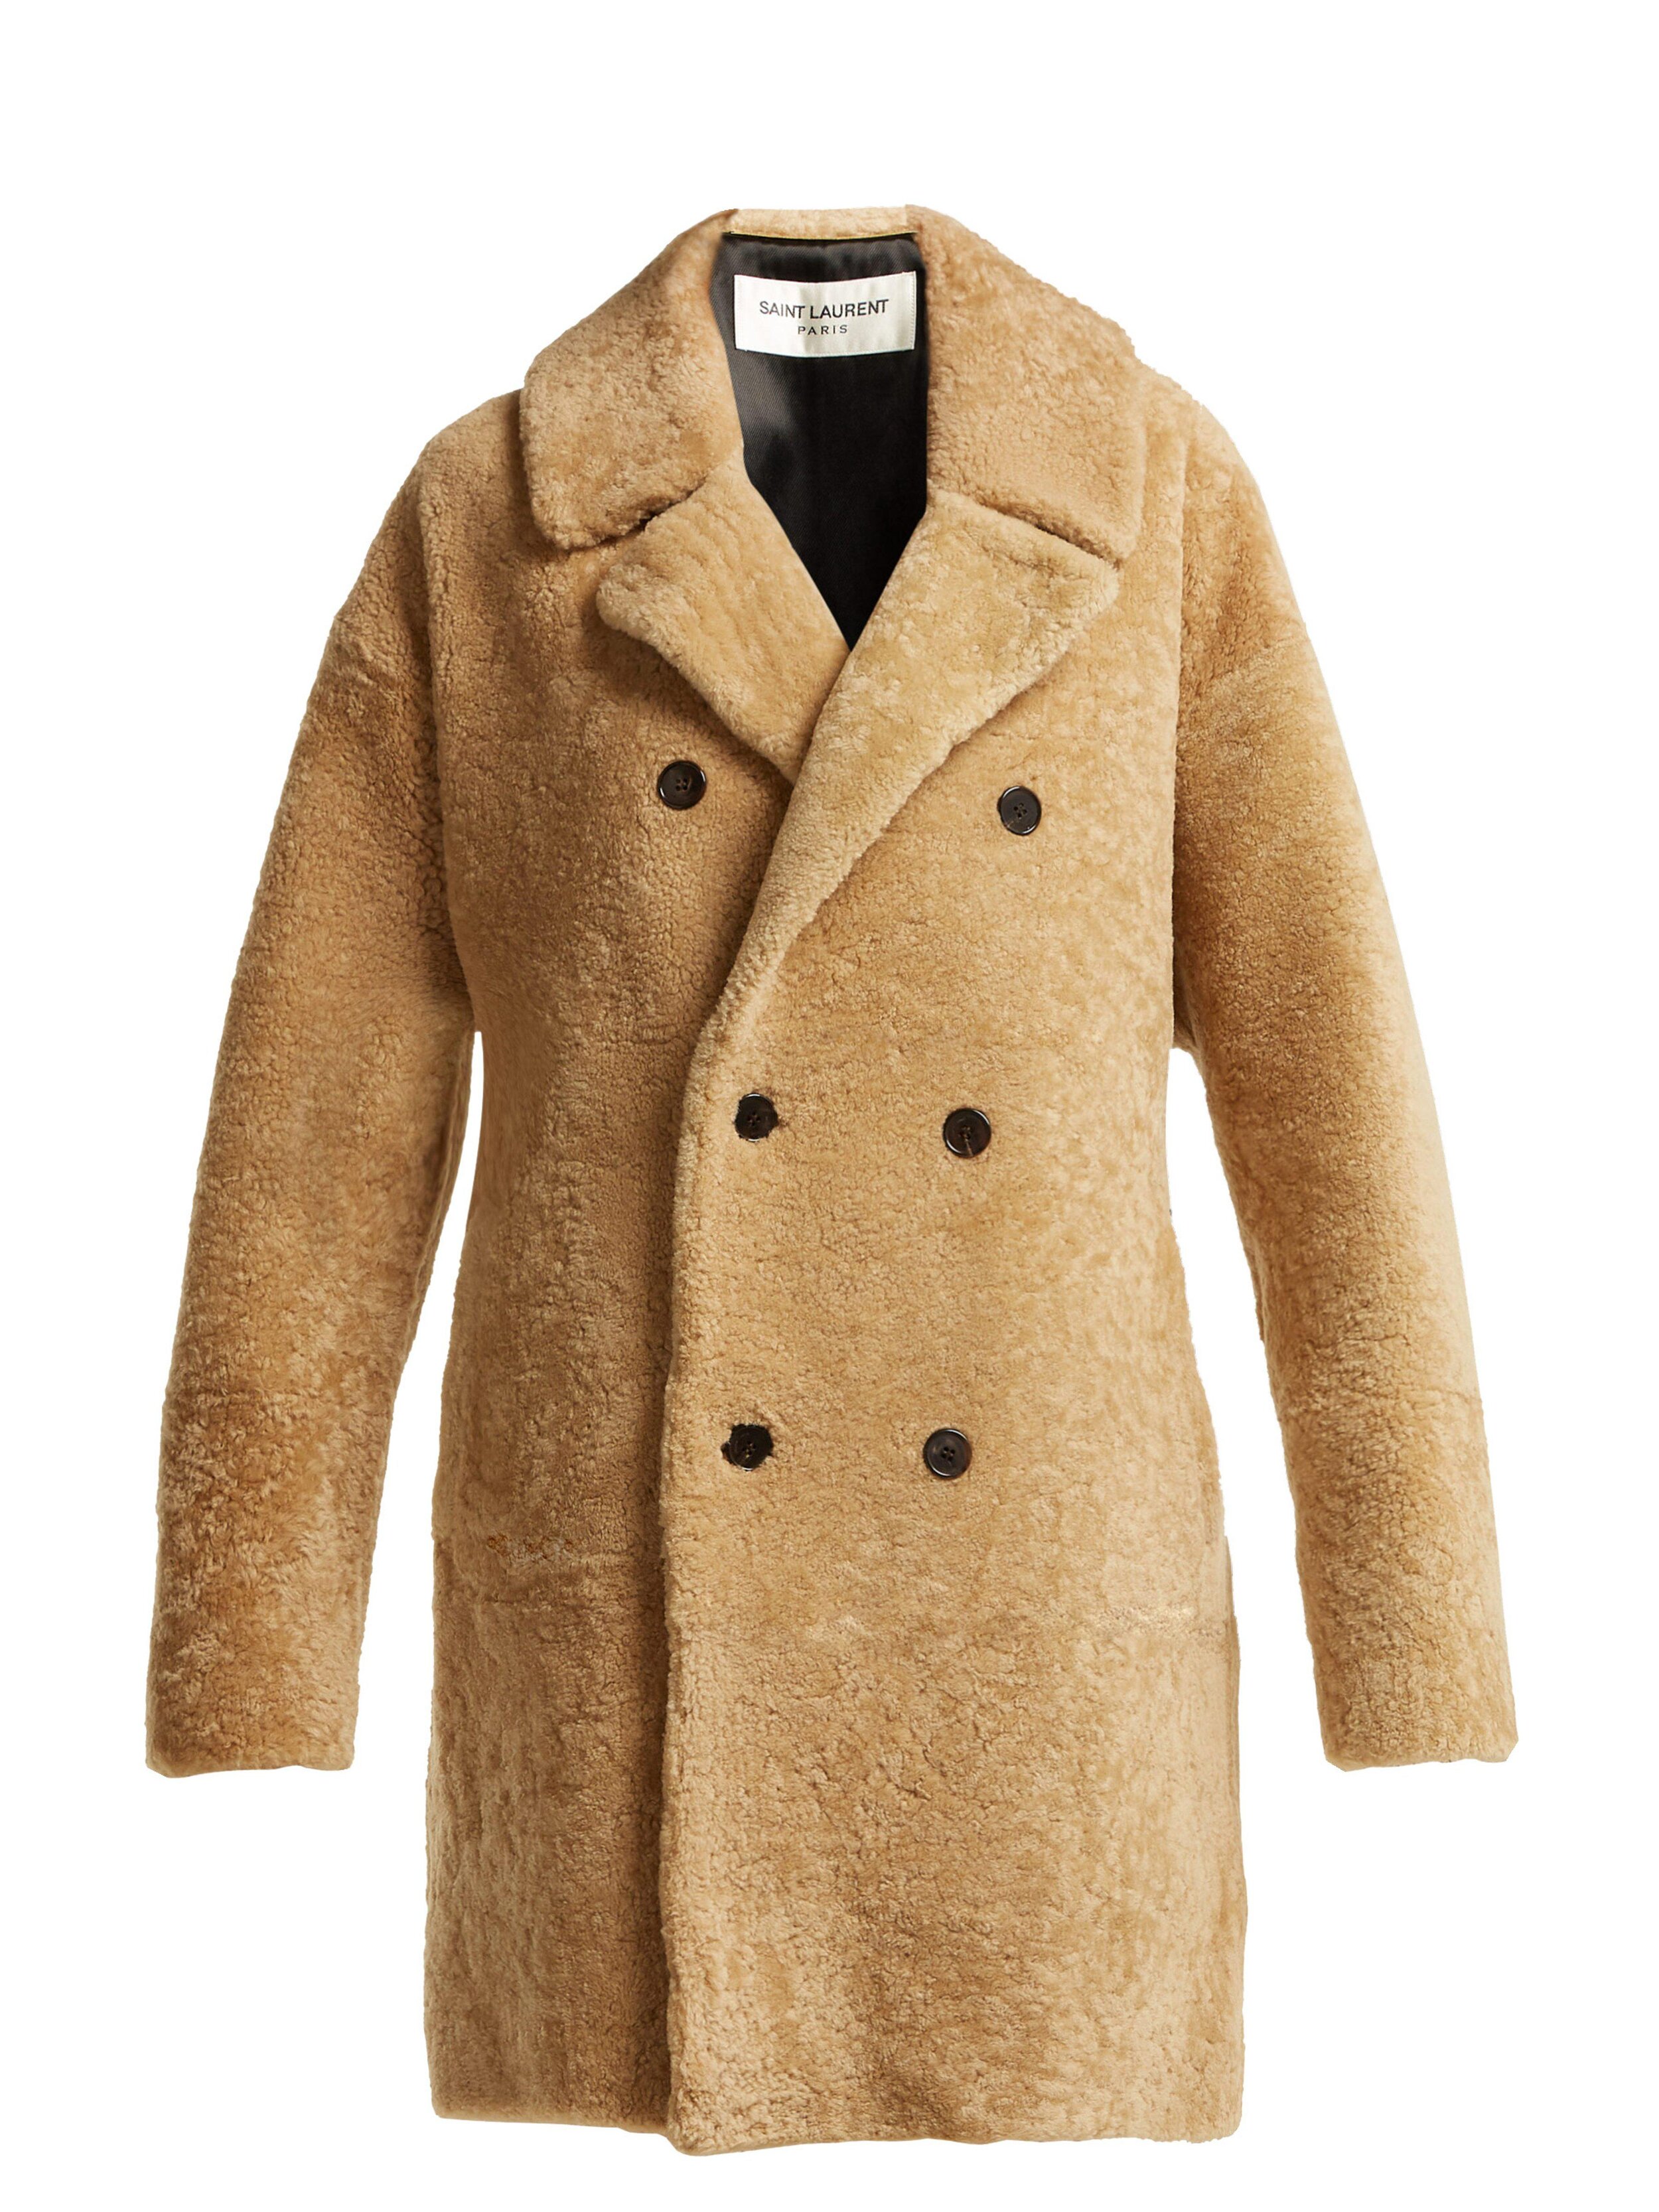 Saint Laurent Double Breasted Shearling Coat in Natural.jpg